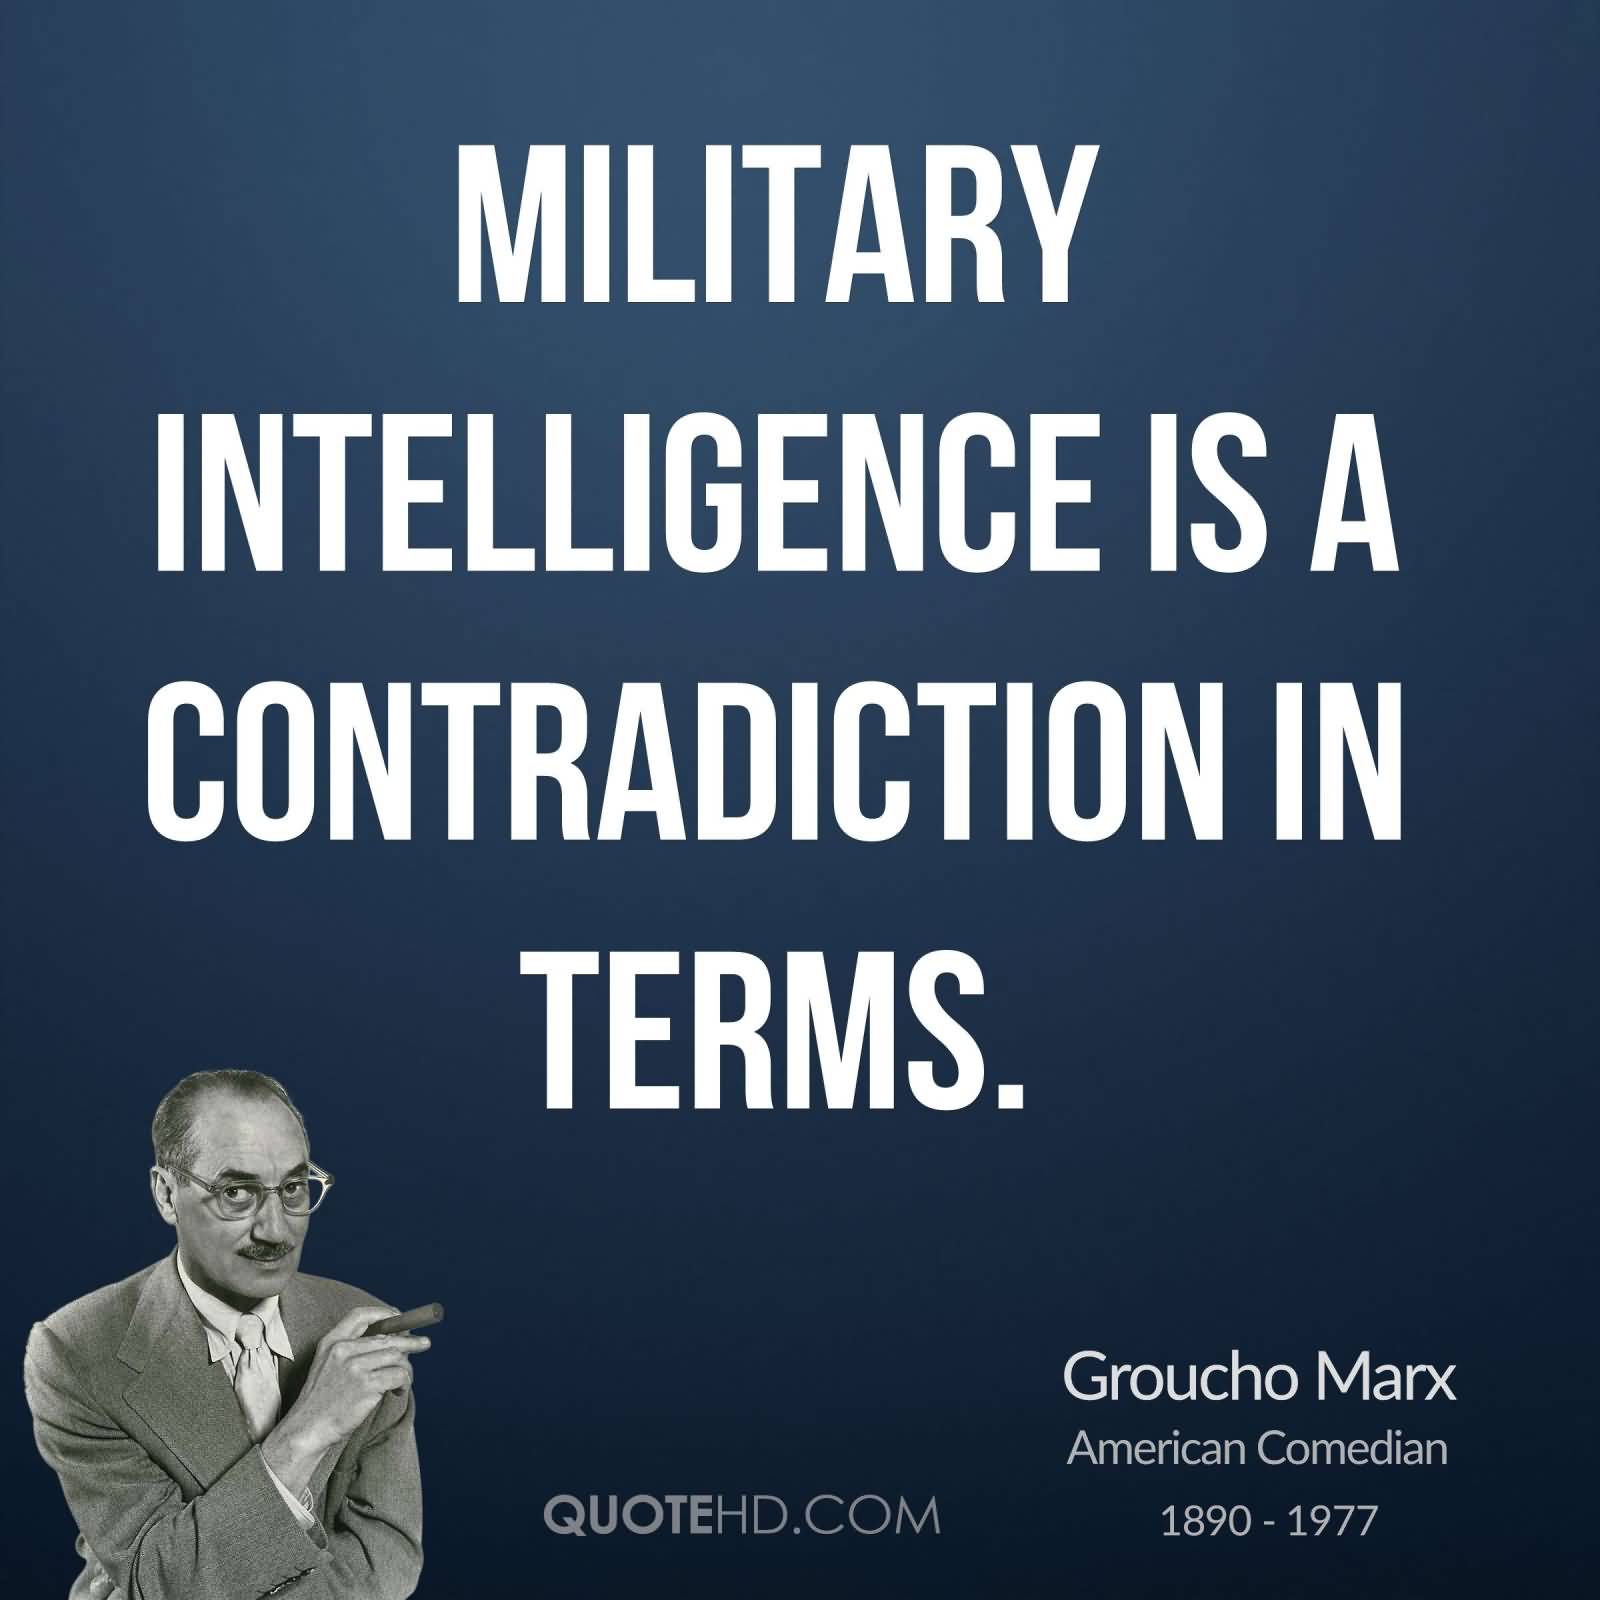 Military intelligence is a contradiction in terms. Groucho Marx